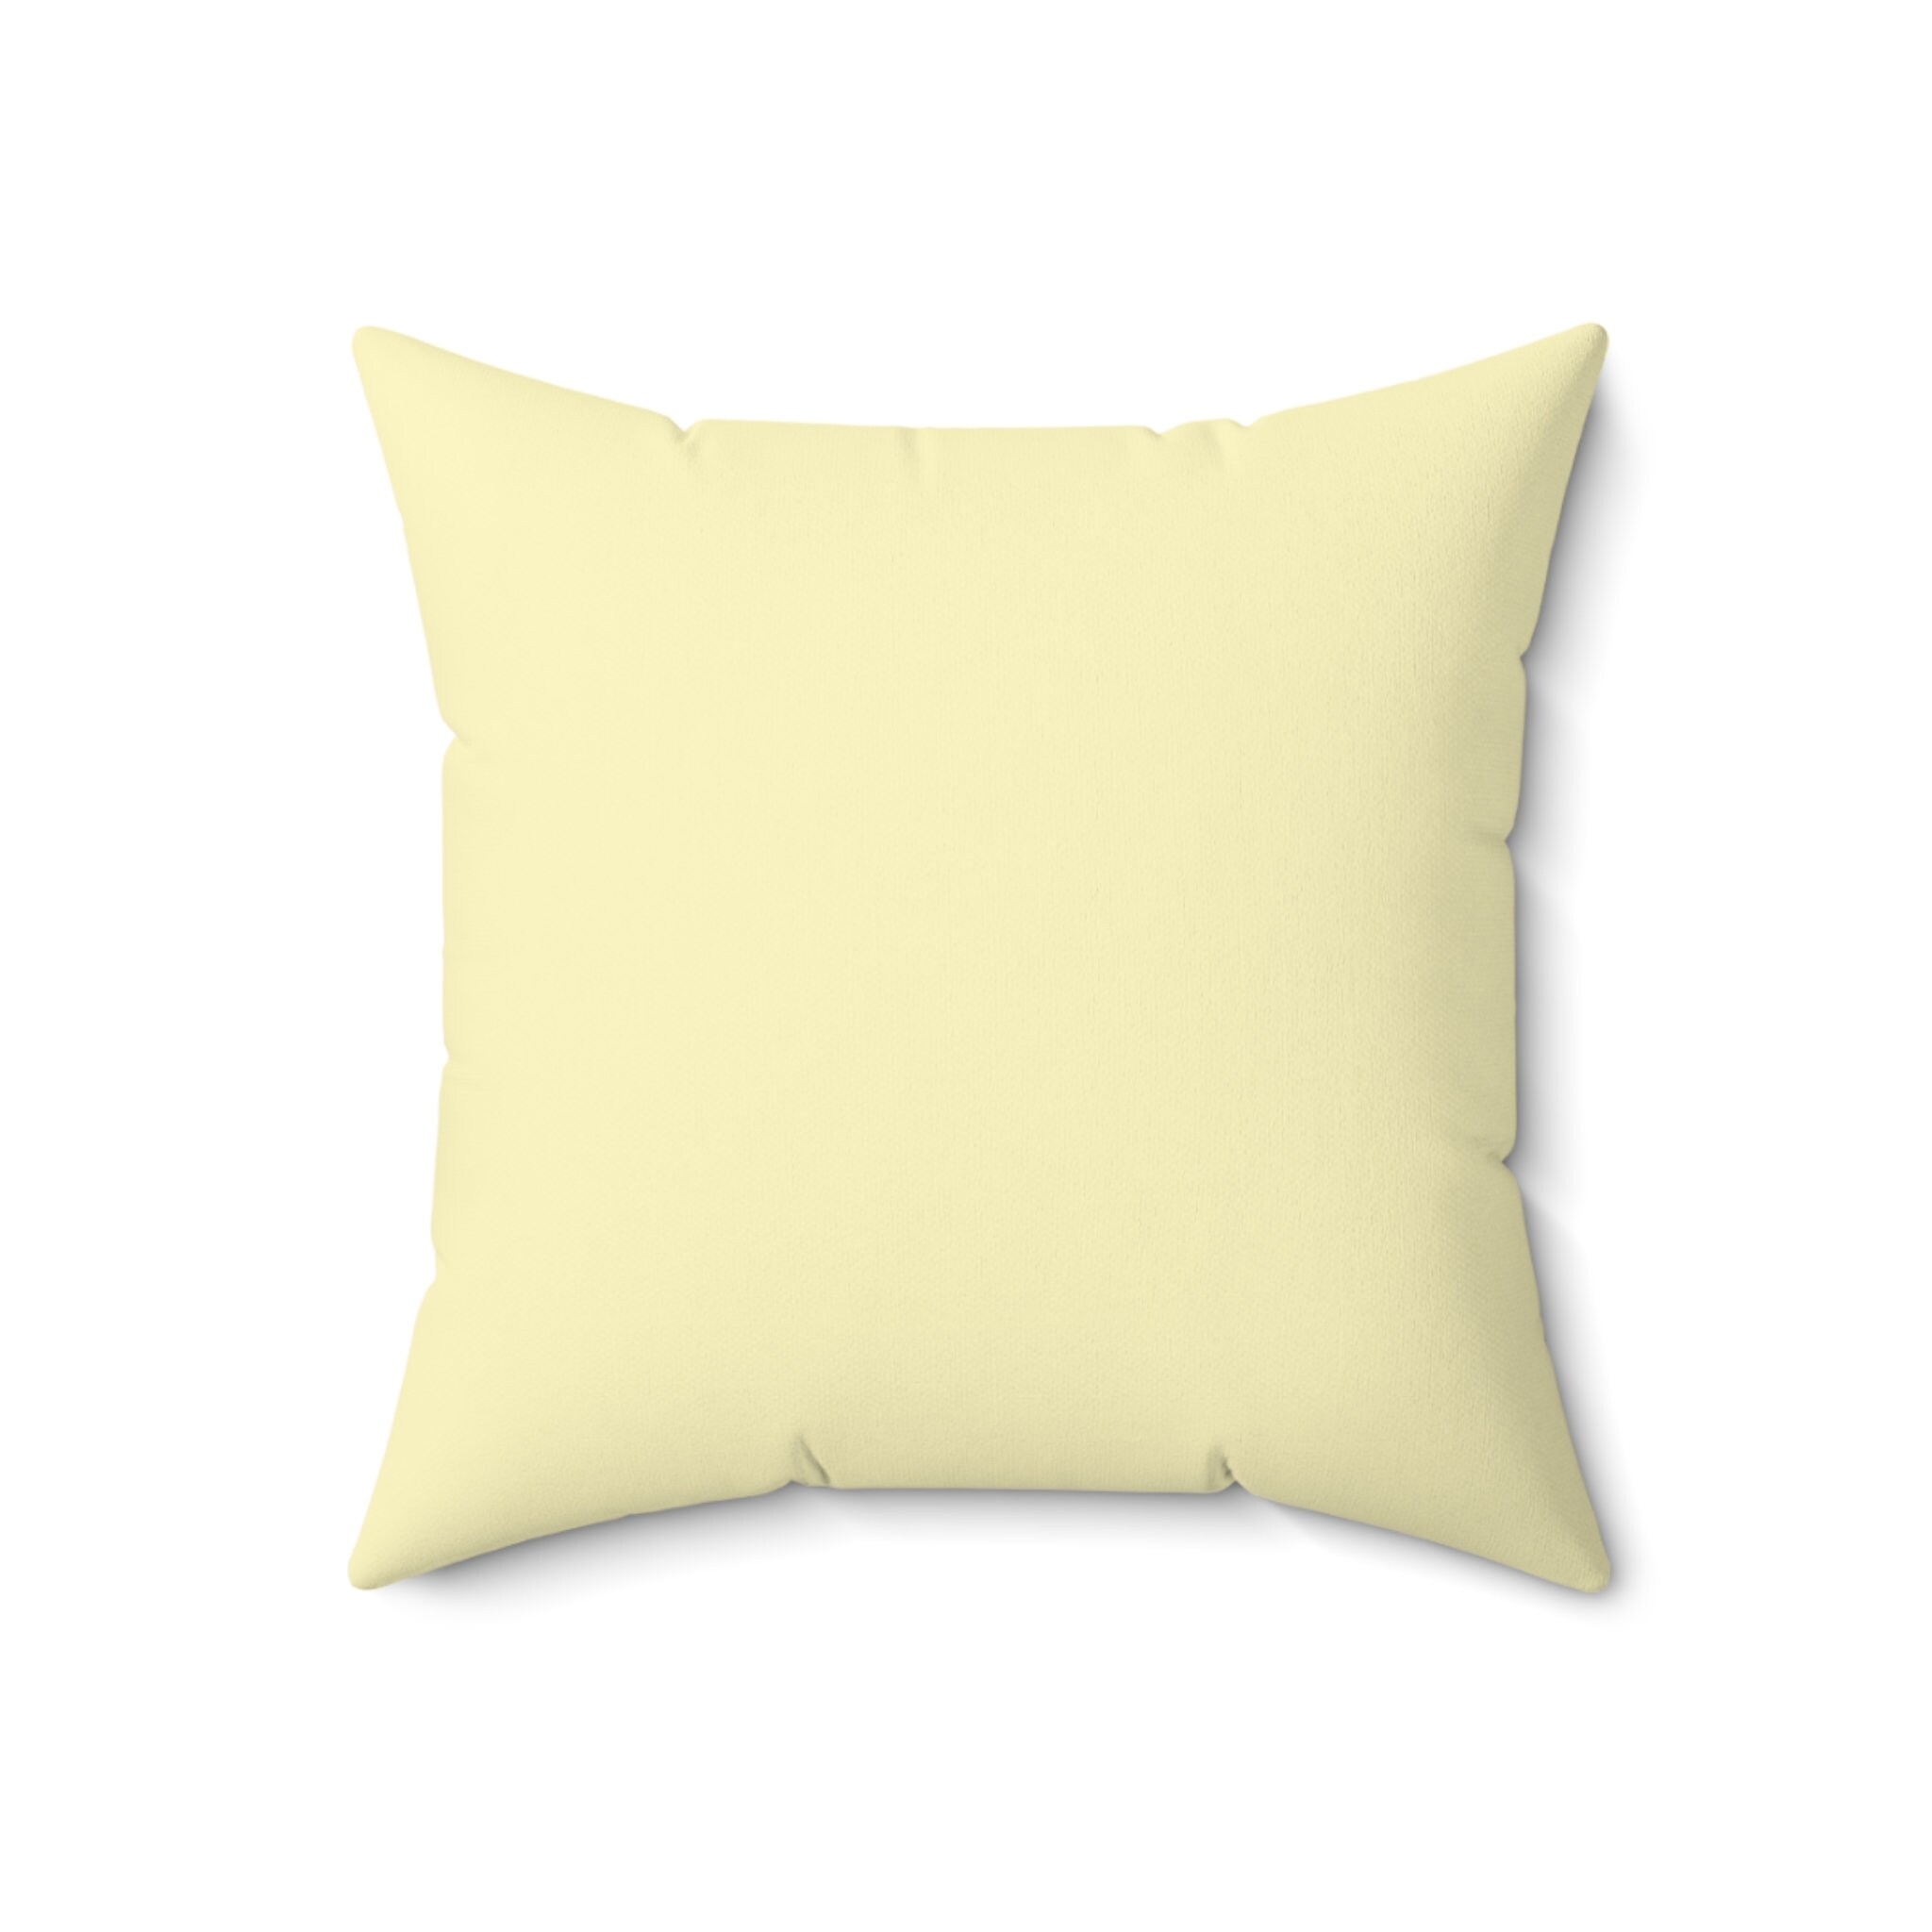 at Home Butter Yellow Canvas Outdoor Square Throw Pillow, 16